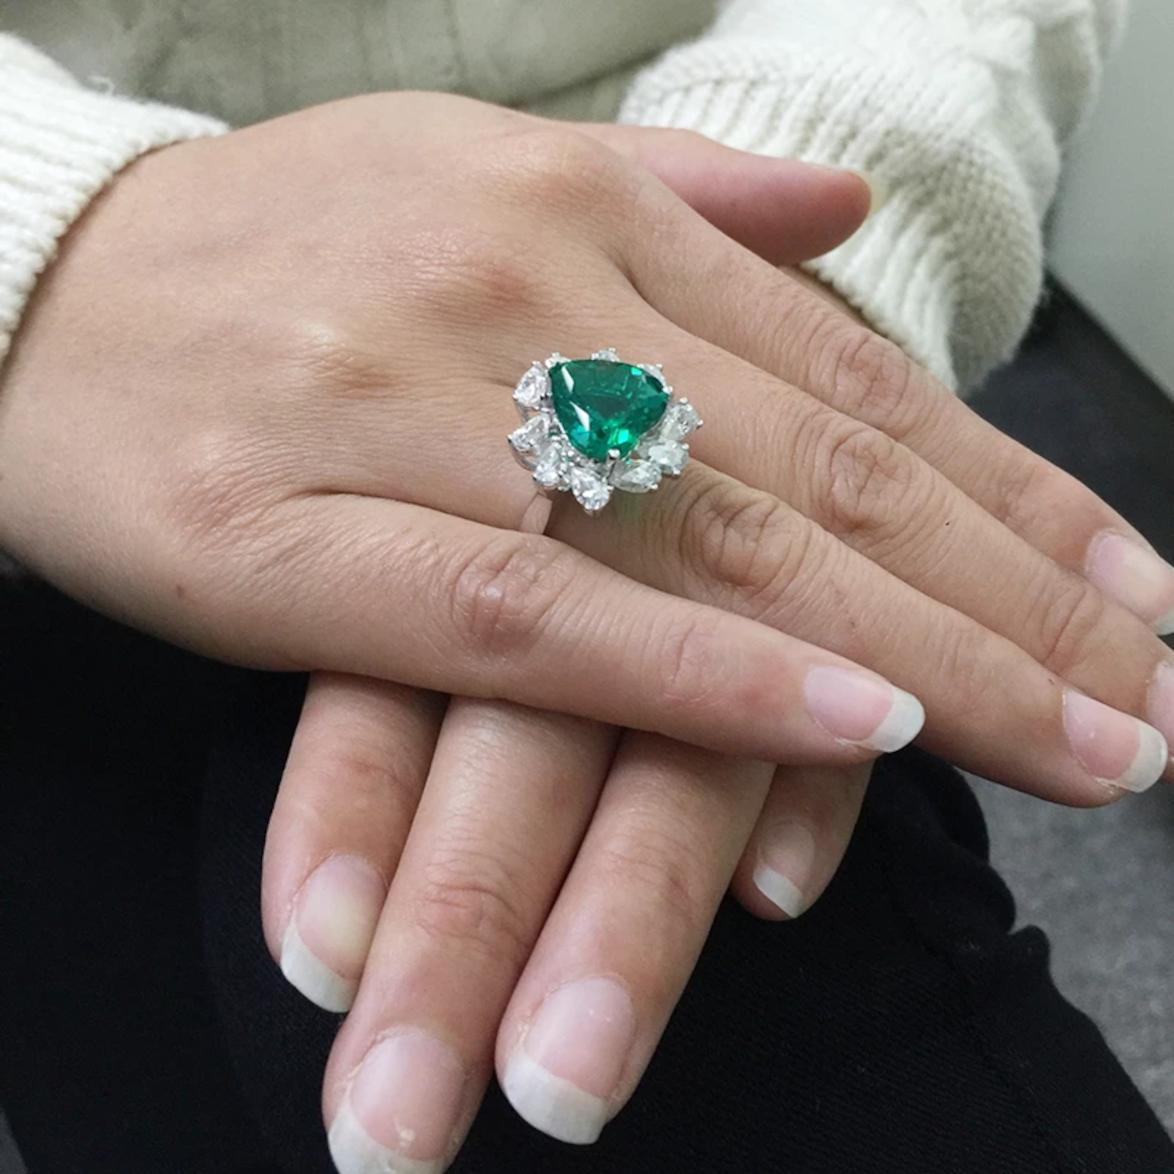 An exquisite heart shape emerald with diamond ring.
These beautiful piece is handmade in Italy in solid 18 carats white gold mounting and is composed of a heart shape emerald and pear cut diamonds halo all very clear and full of brilliance.

The